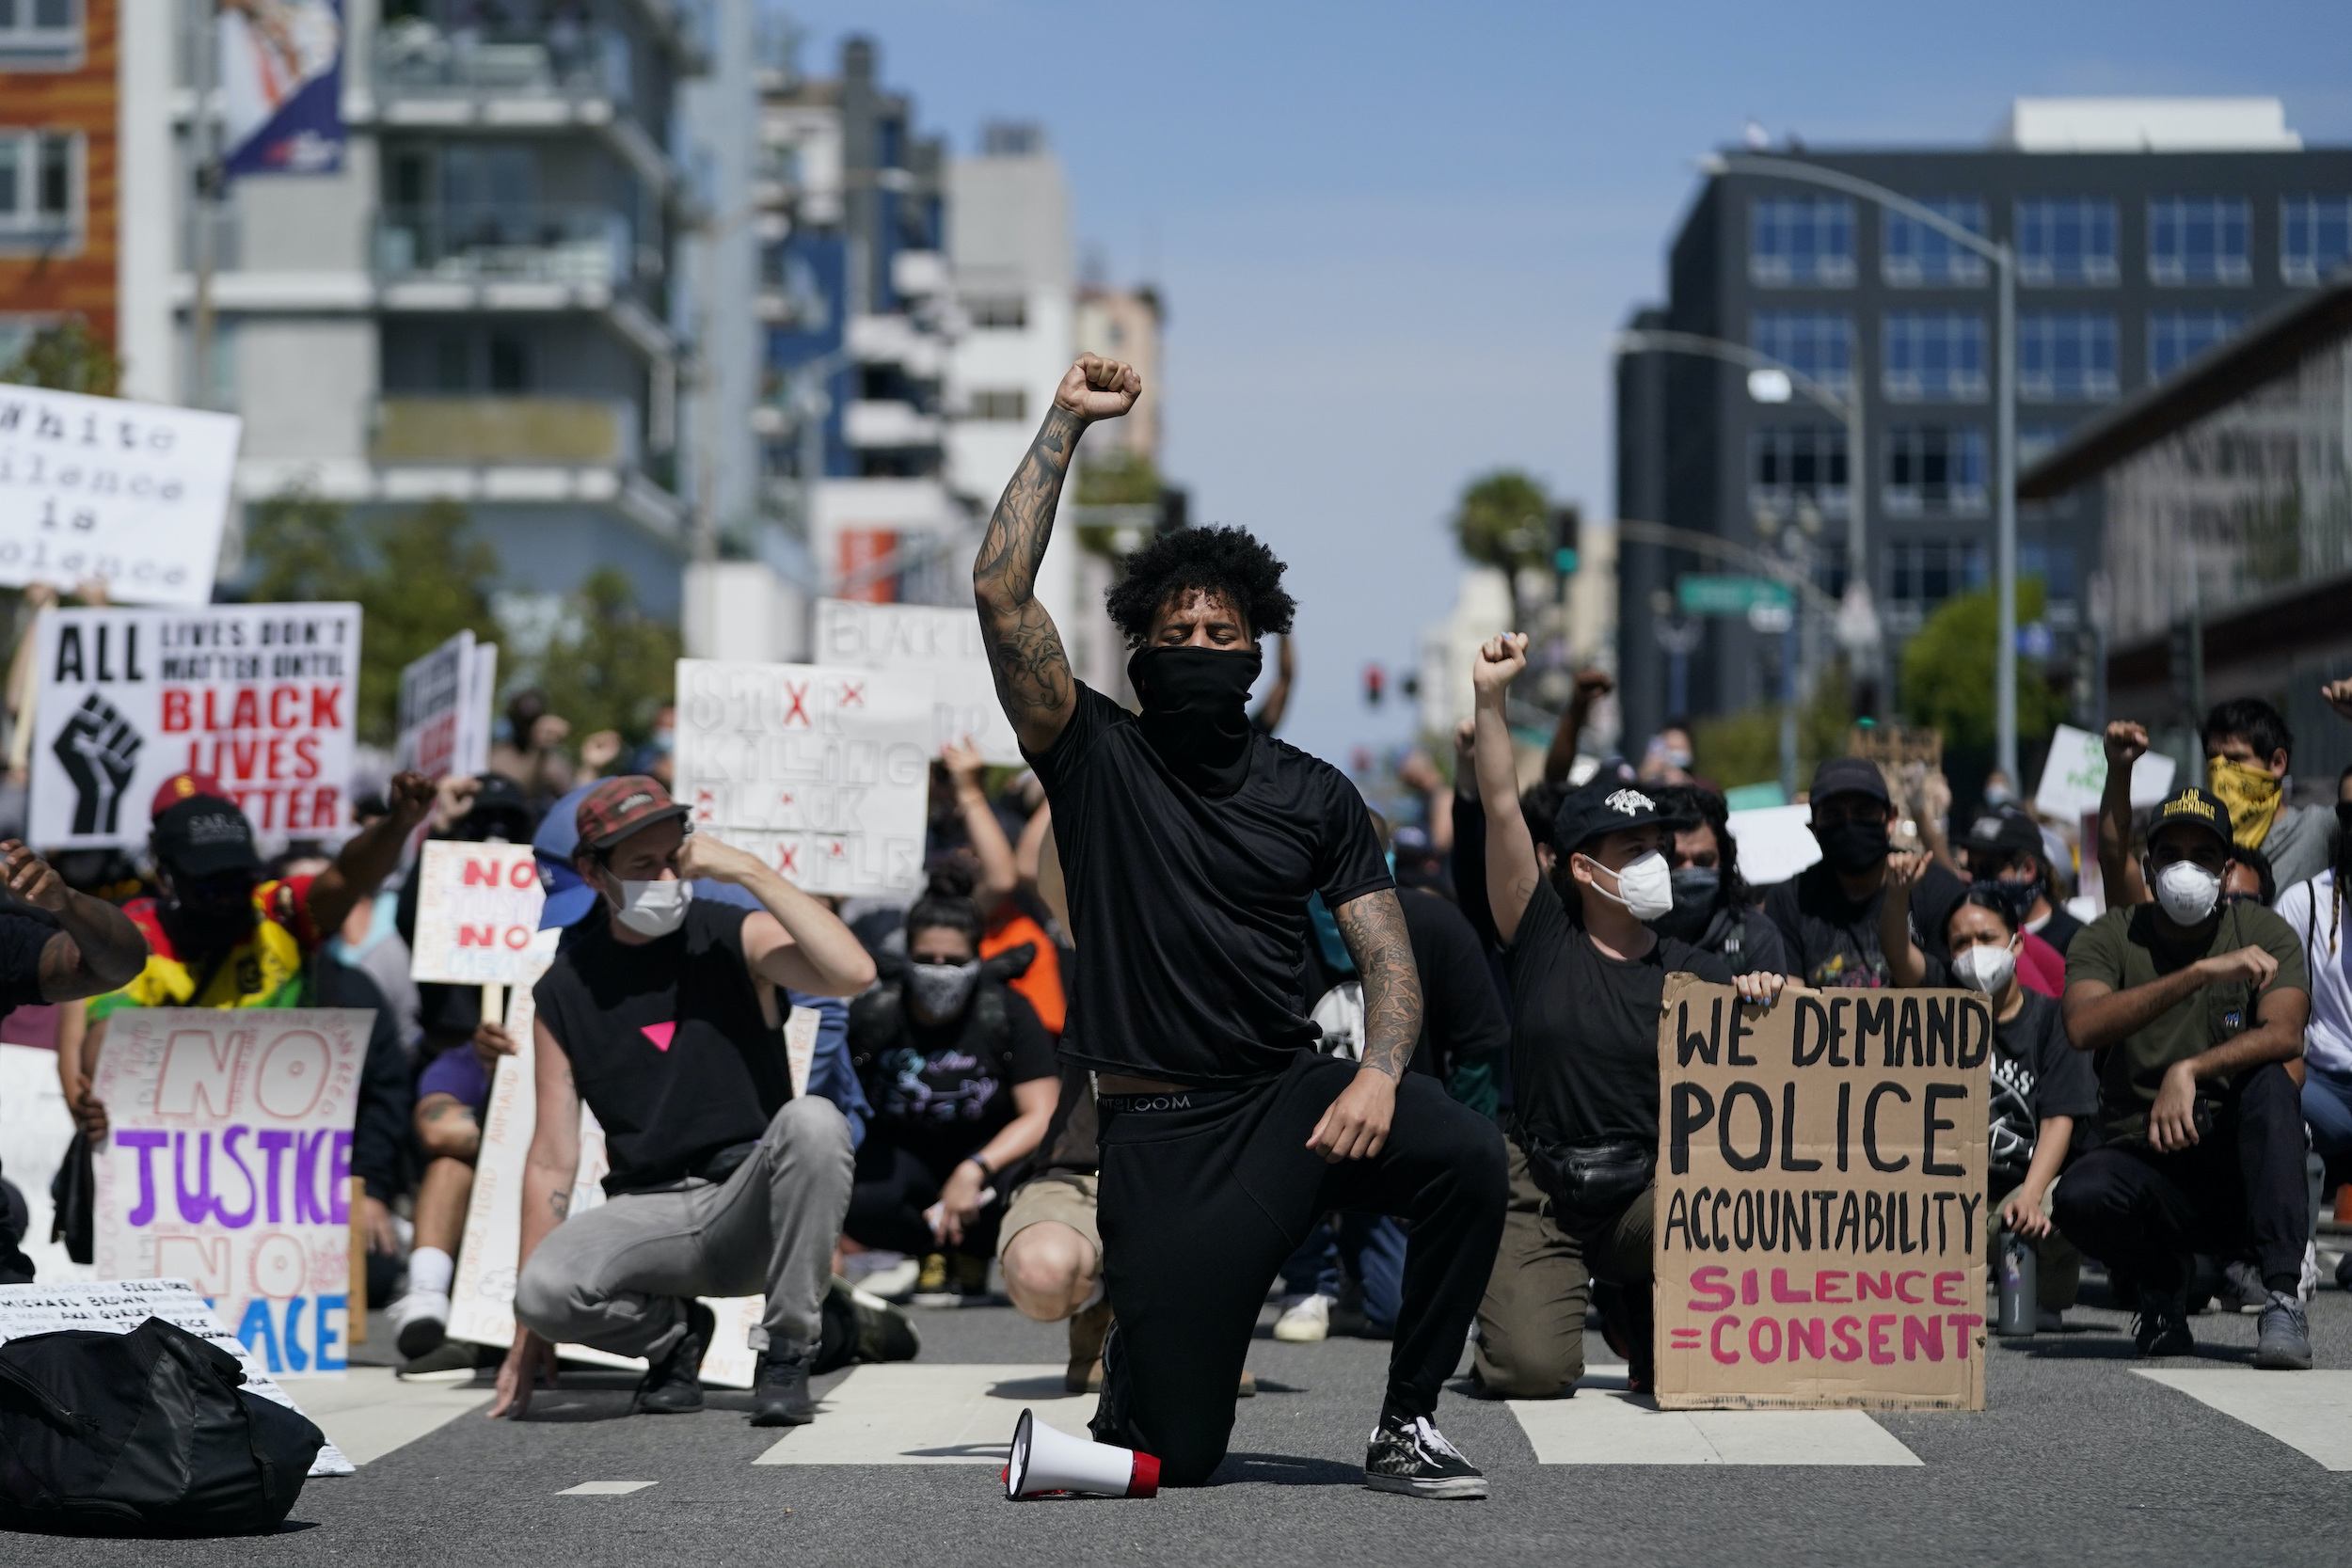 Photographers are being called on to stop showing protesters’ faces. Should they? – Poynter